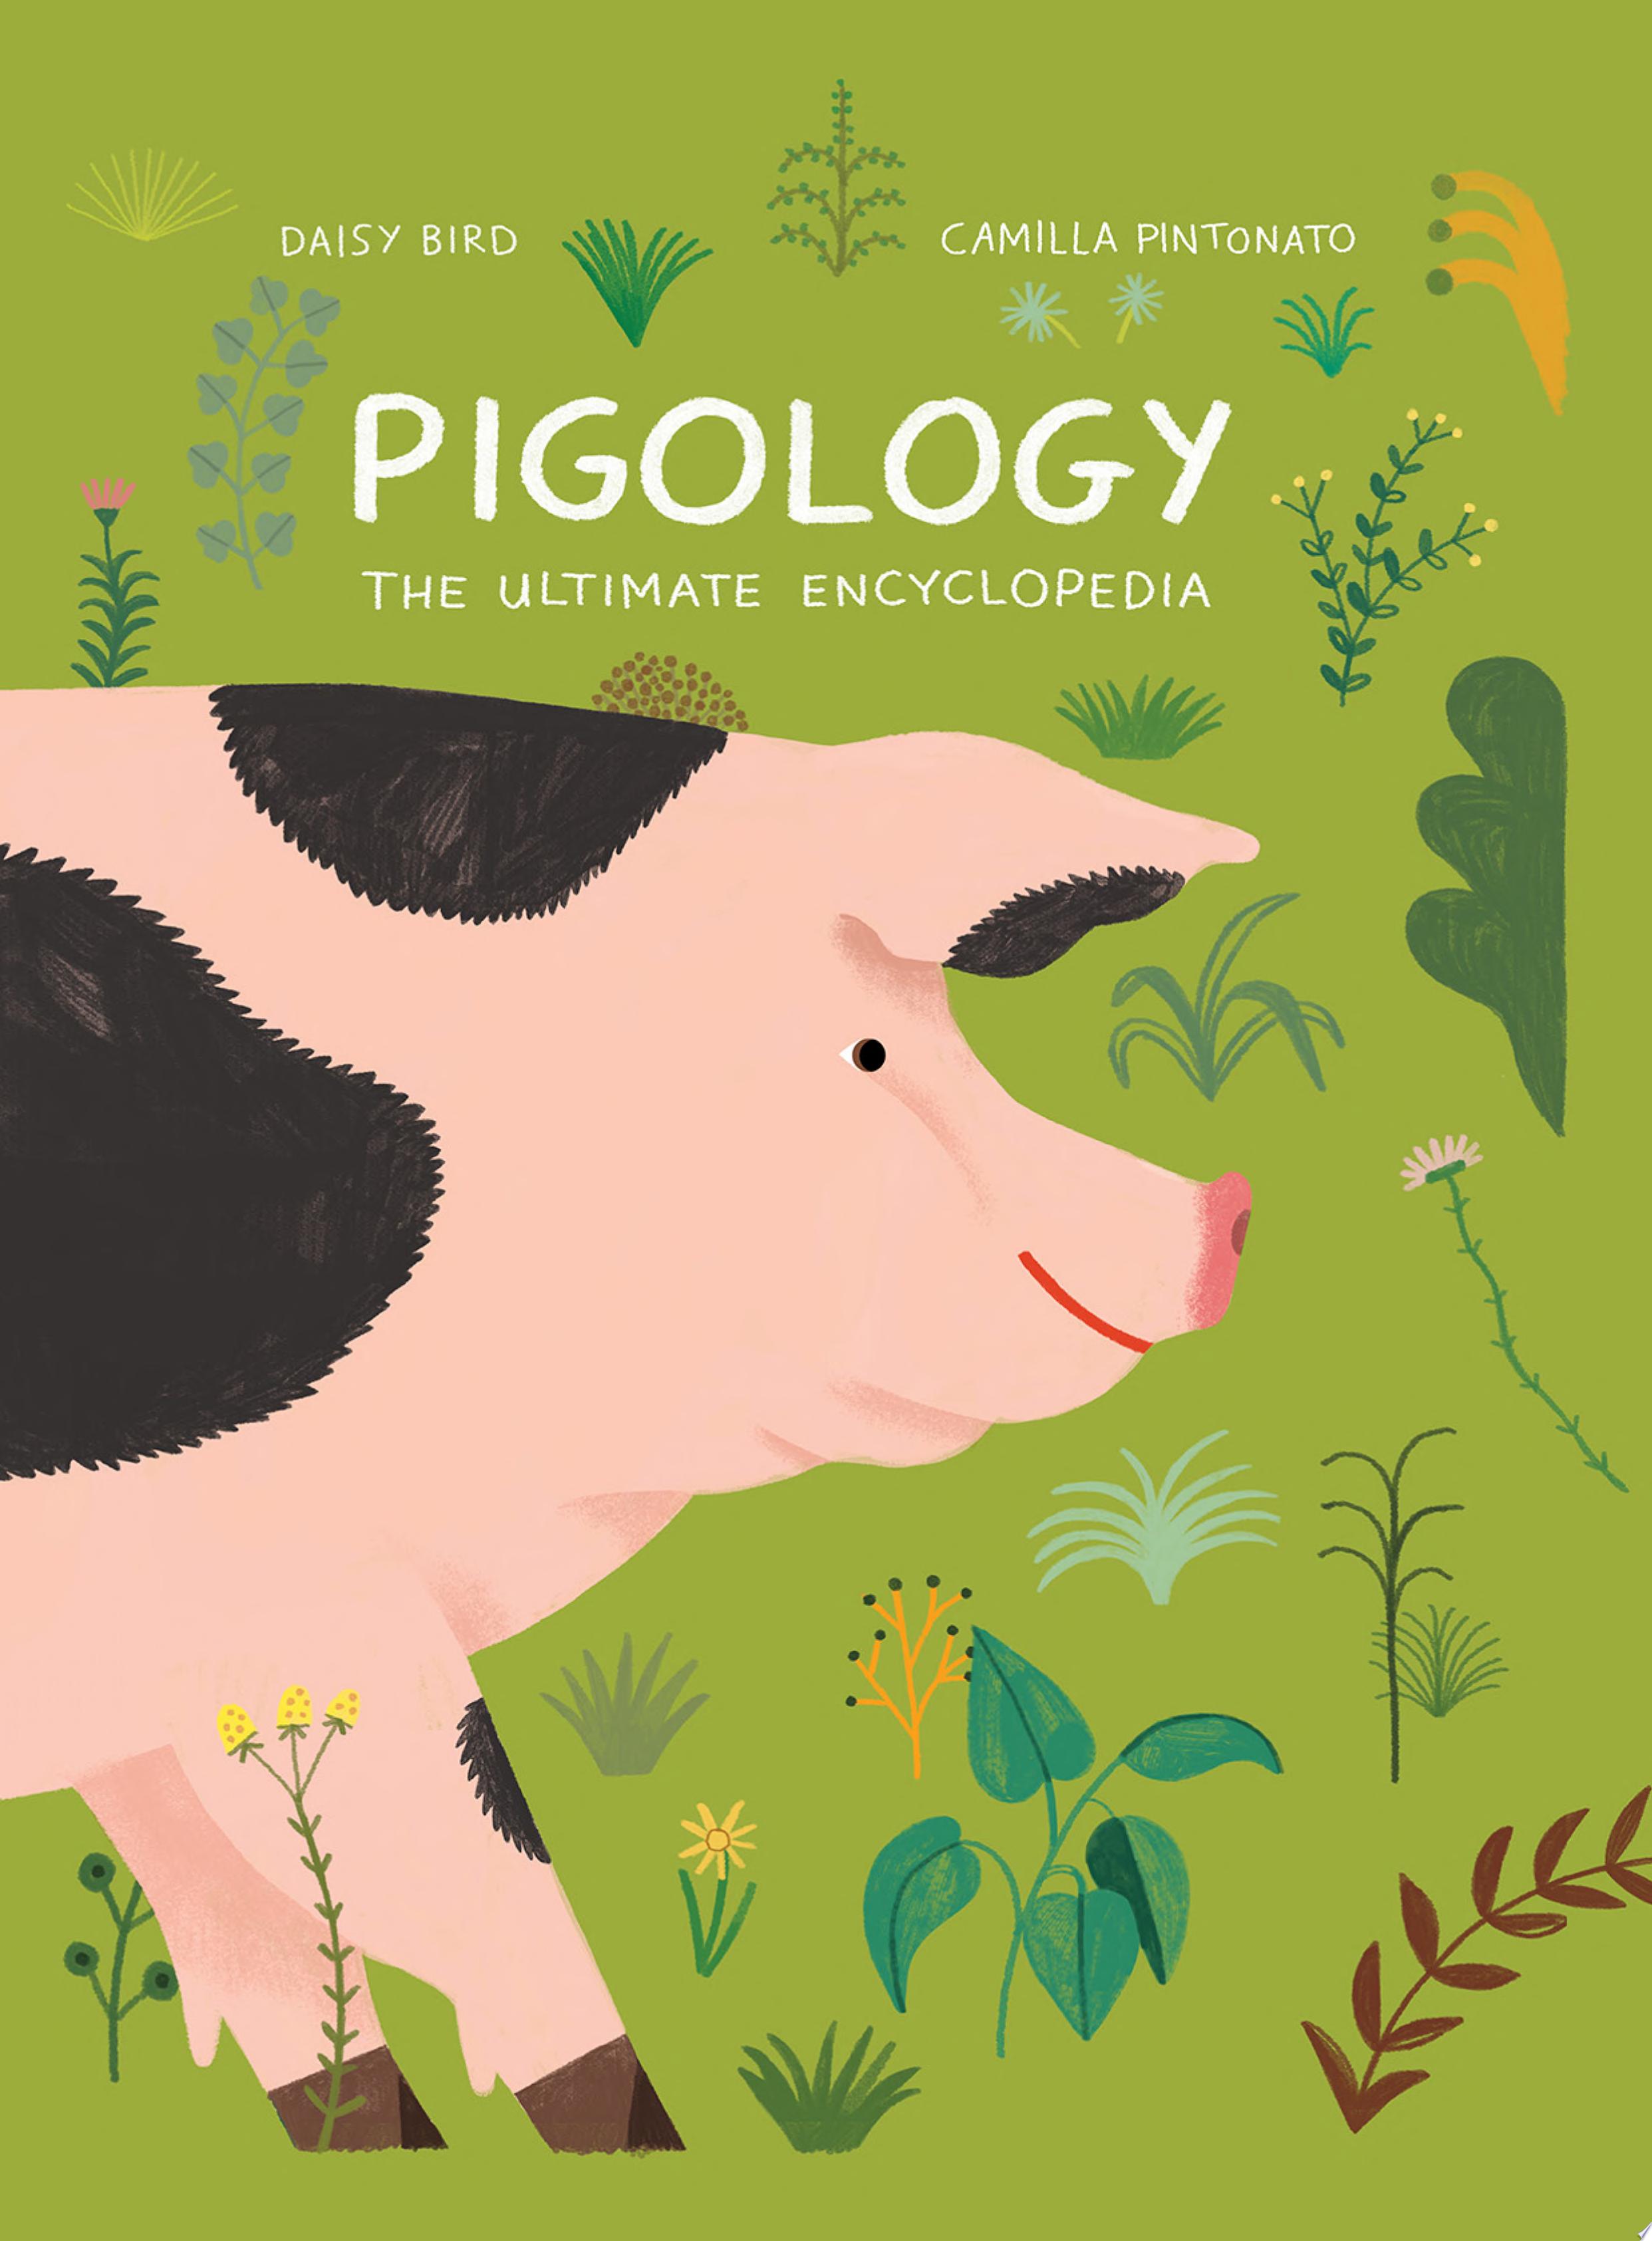 Image for "Pigology"